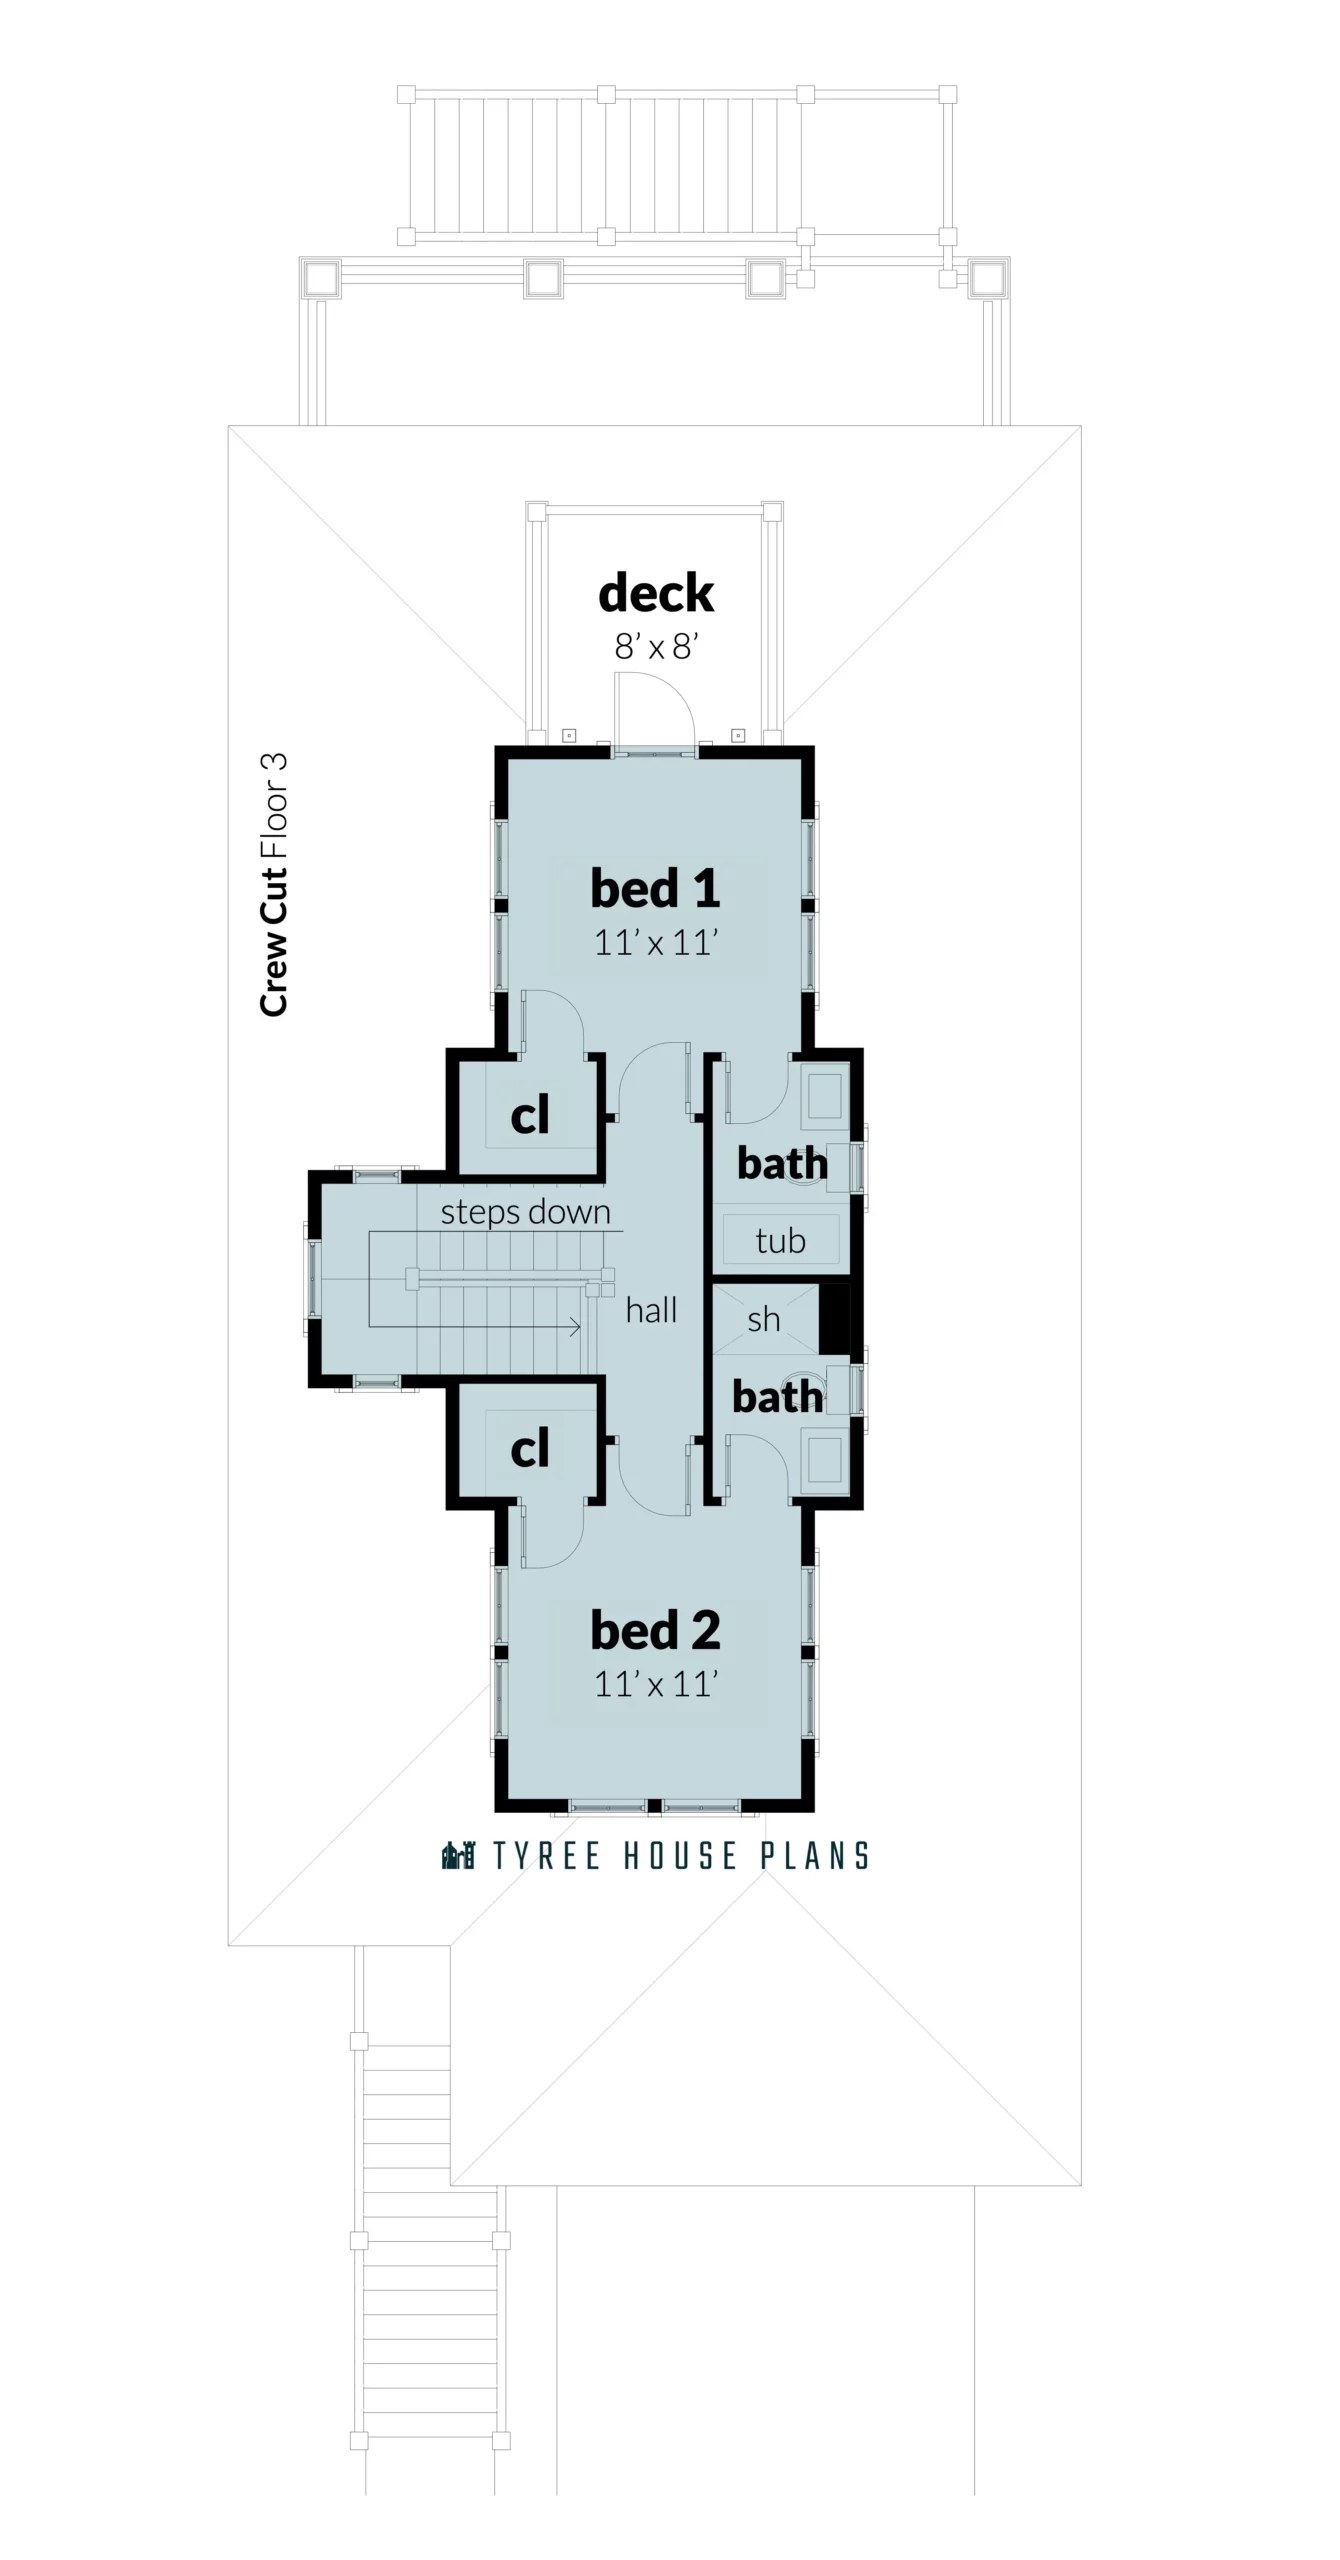 Floor 3. Crew Cut by Tyree House Plans.